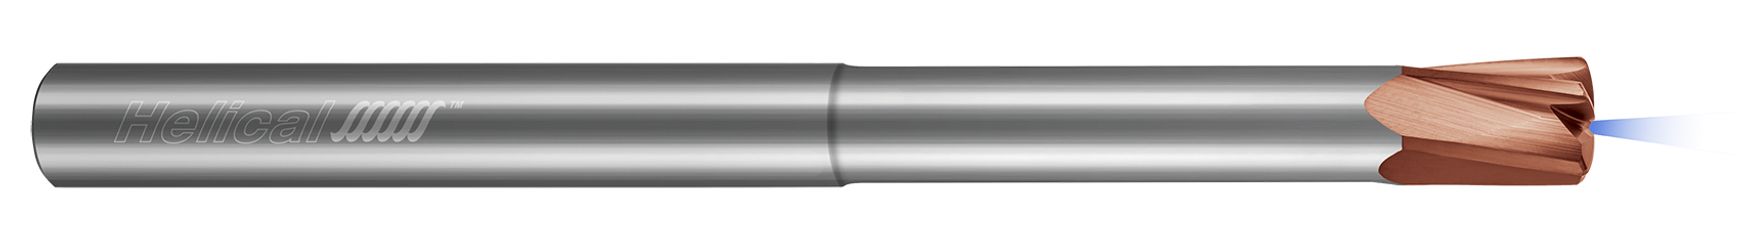 High Feed End Mills-Steels up to 45 Rc-Metric-Variable Pitch-Coolant Through-Reduced Neck